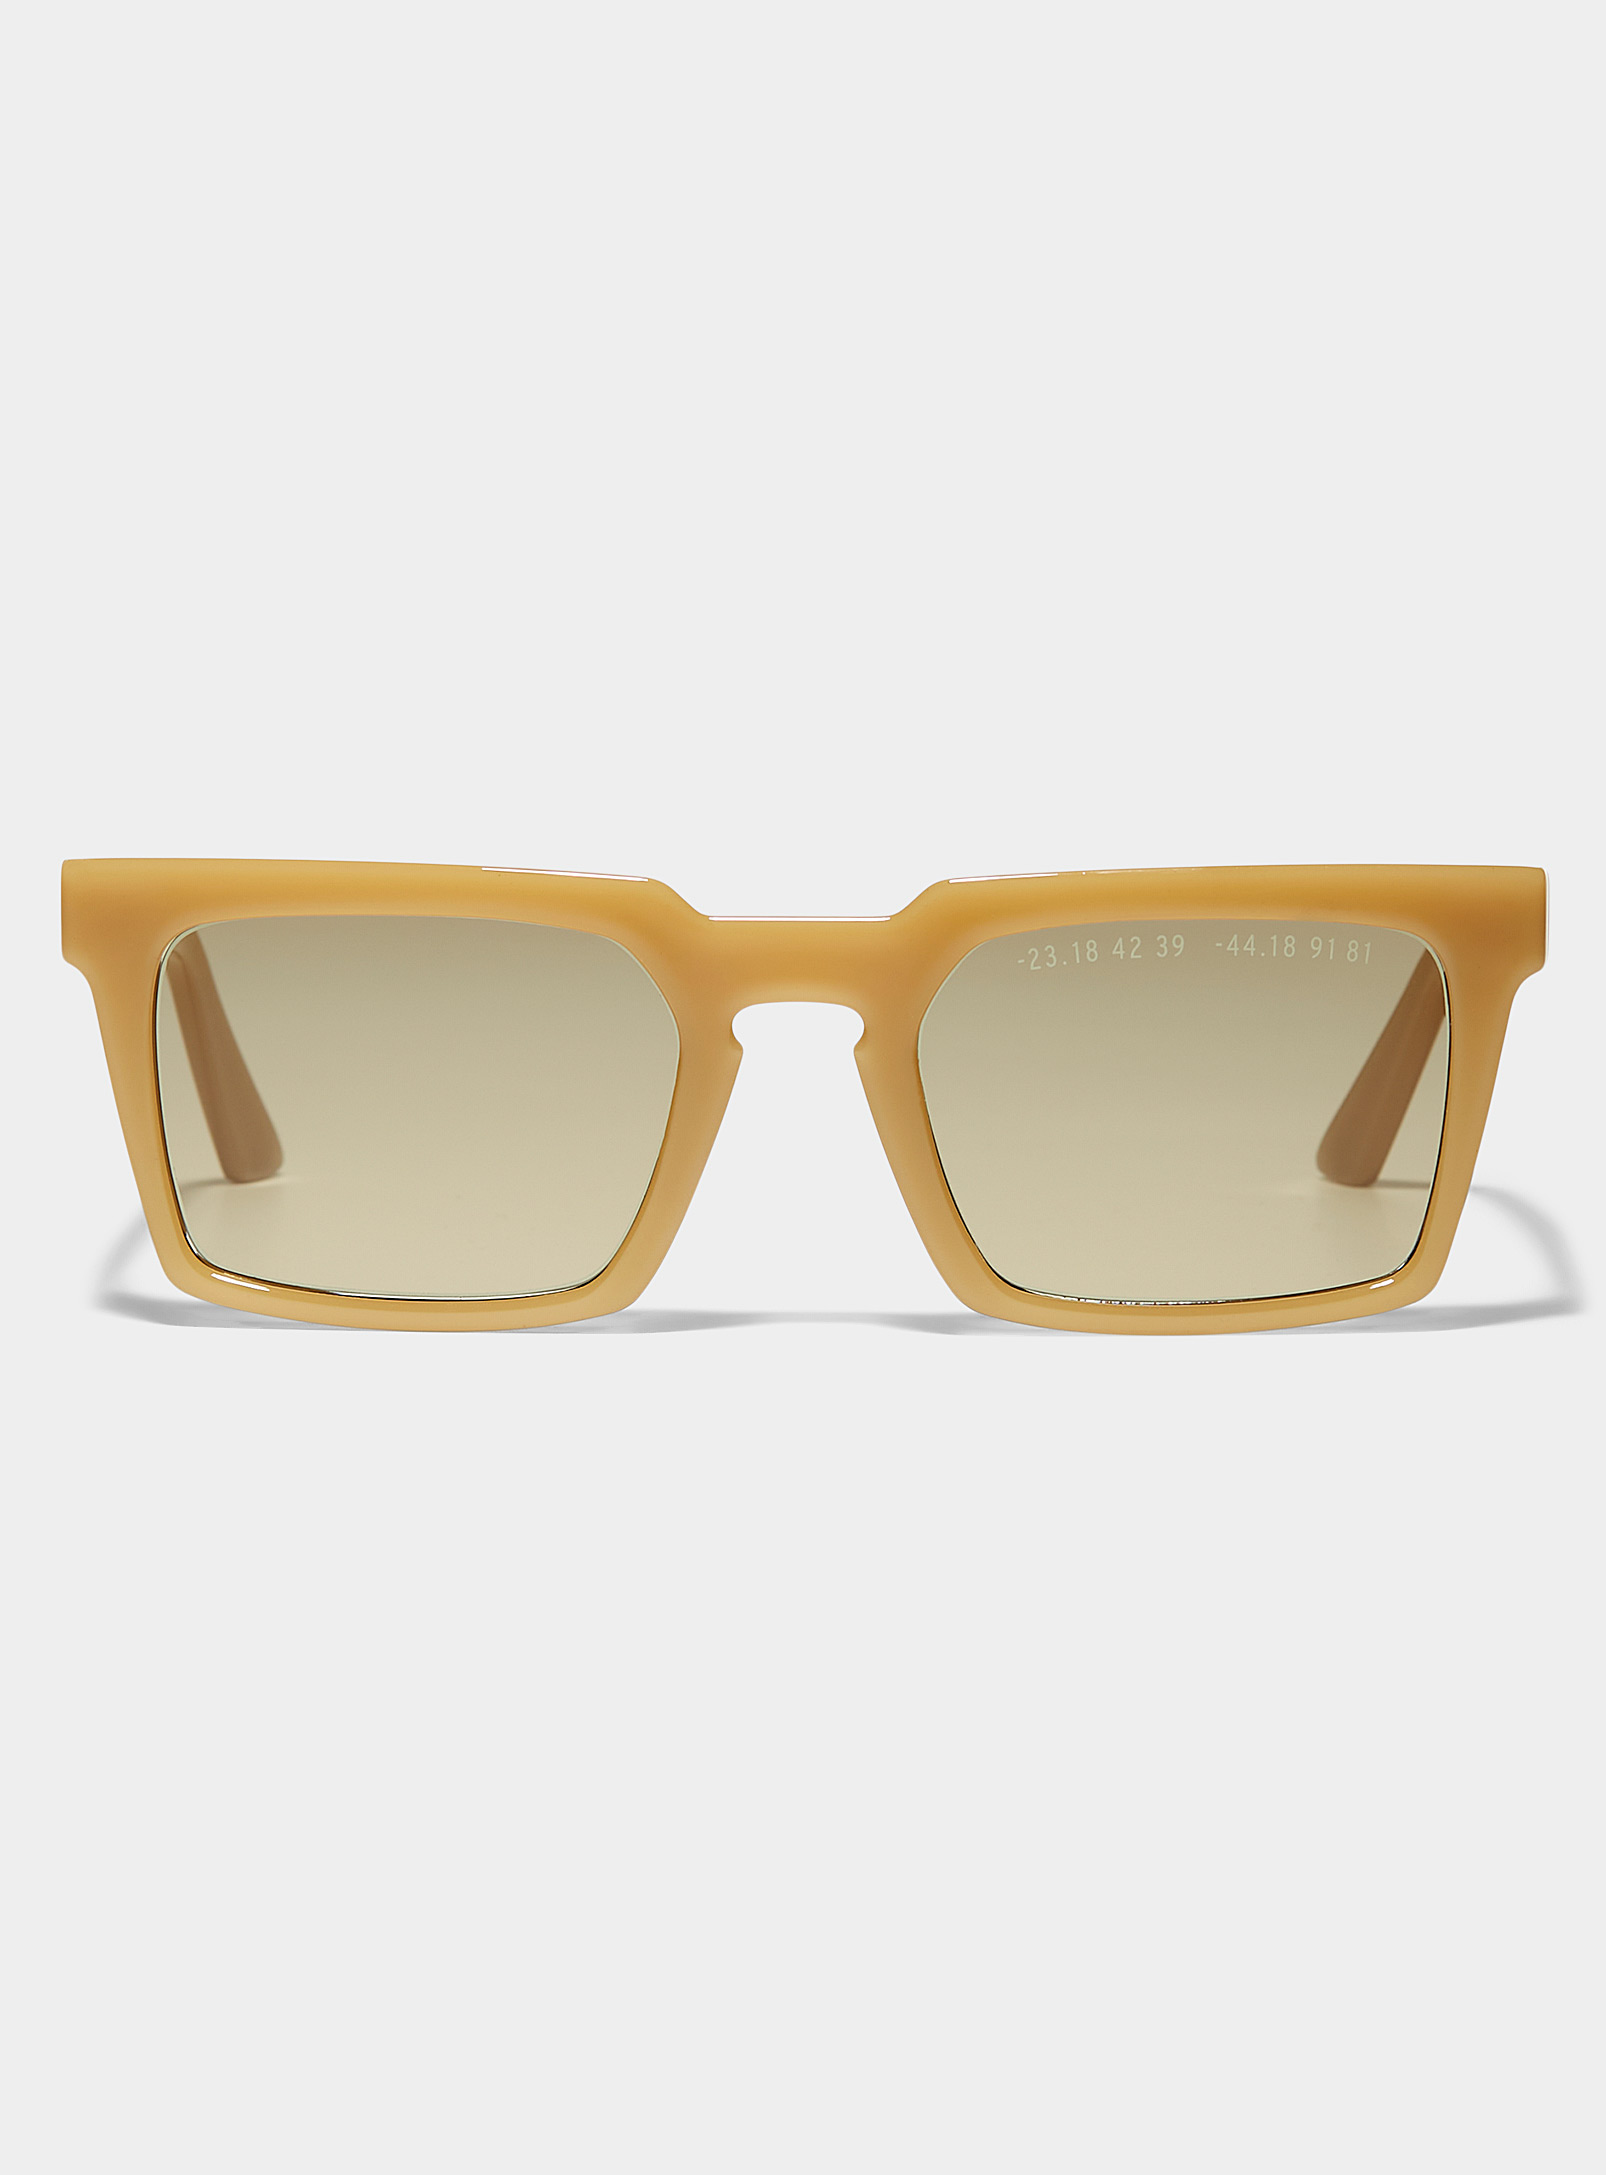 Clean Waves Type 02 Square Sunglasses In Neutral